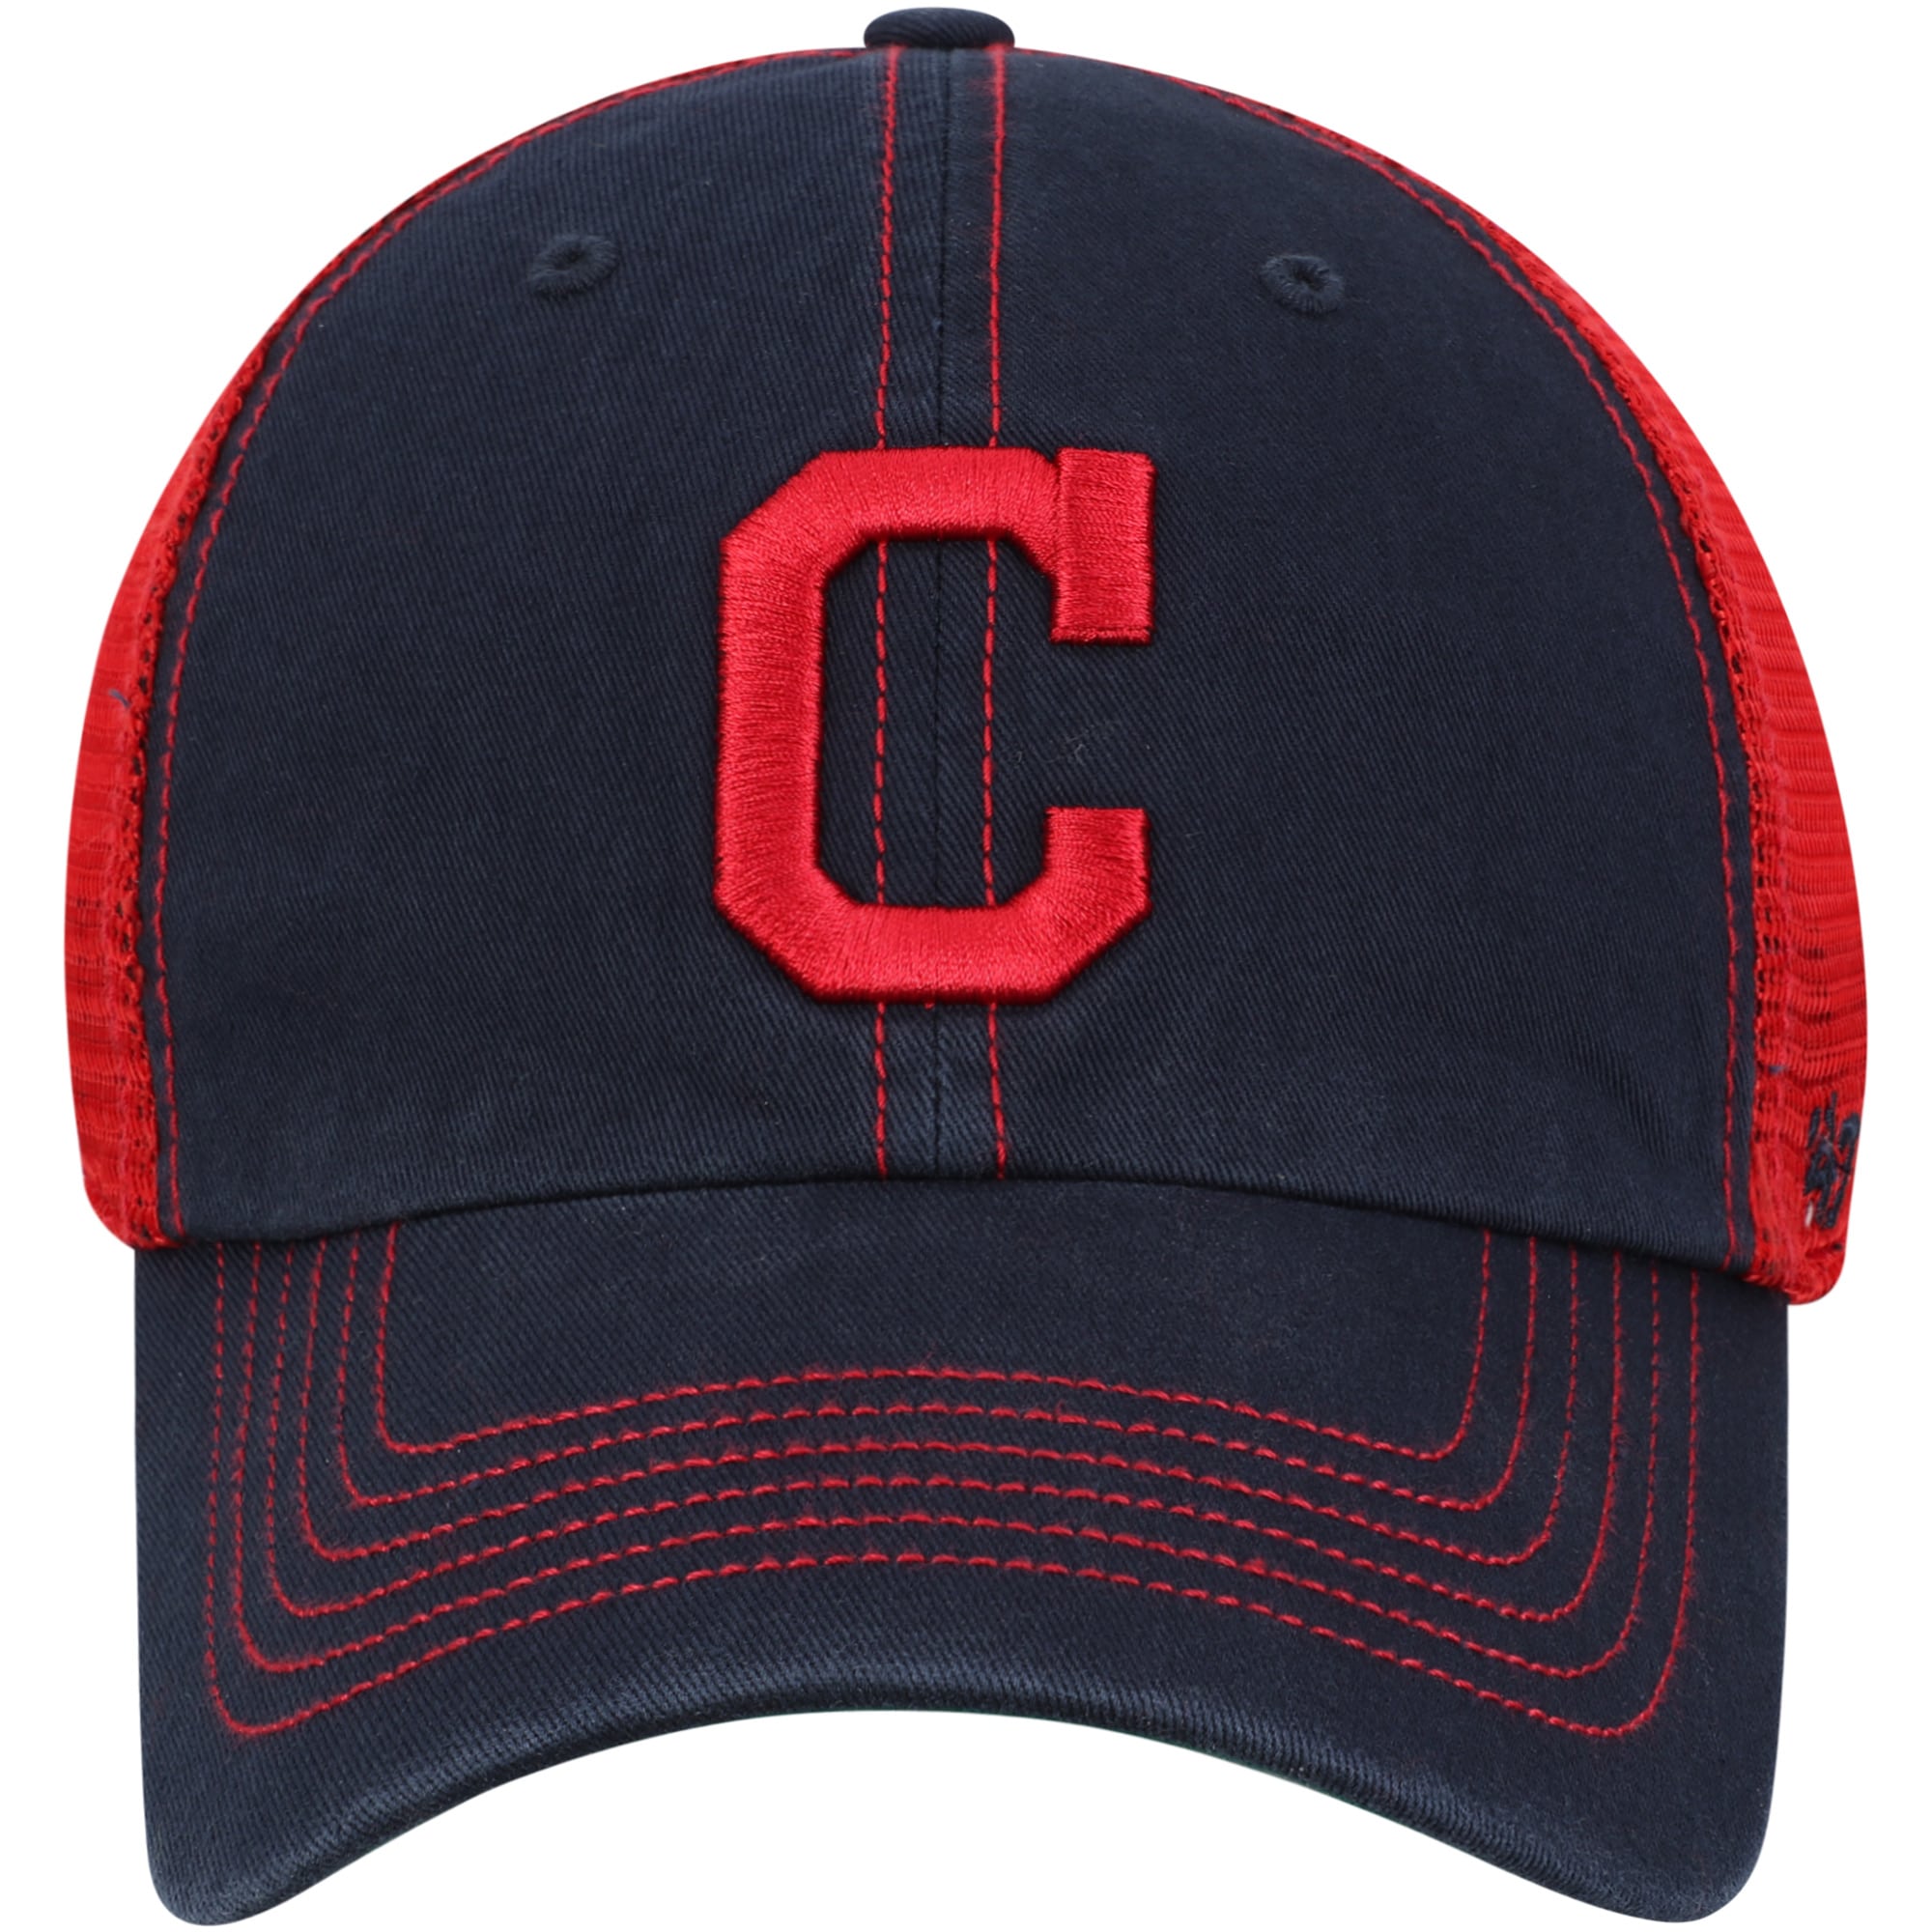 Men's '47 Navy/Red Cleveland Indians Trawler Clean Up Trucker Hat - OSFA - image 2 of 4